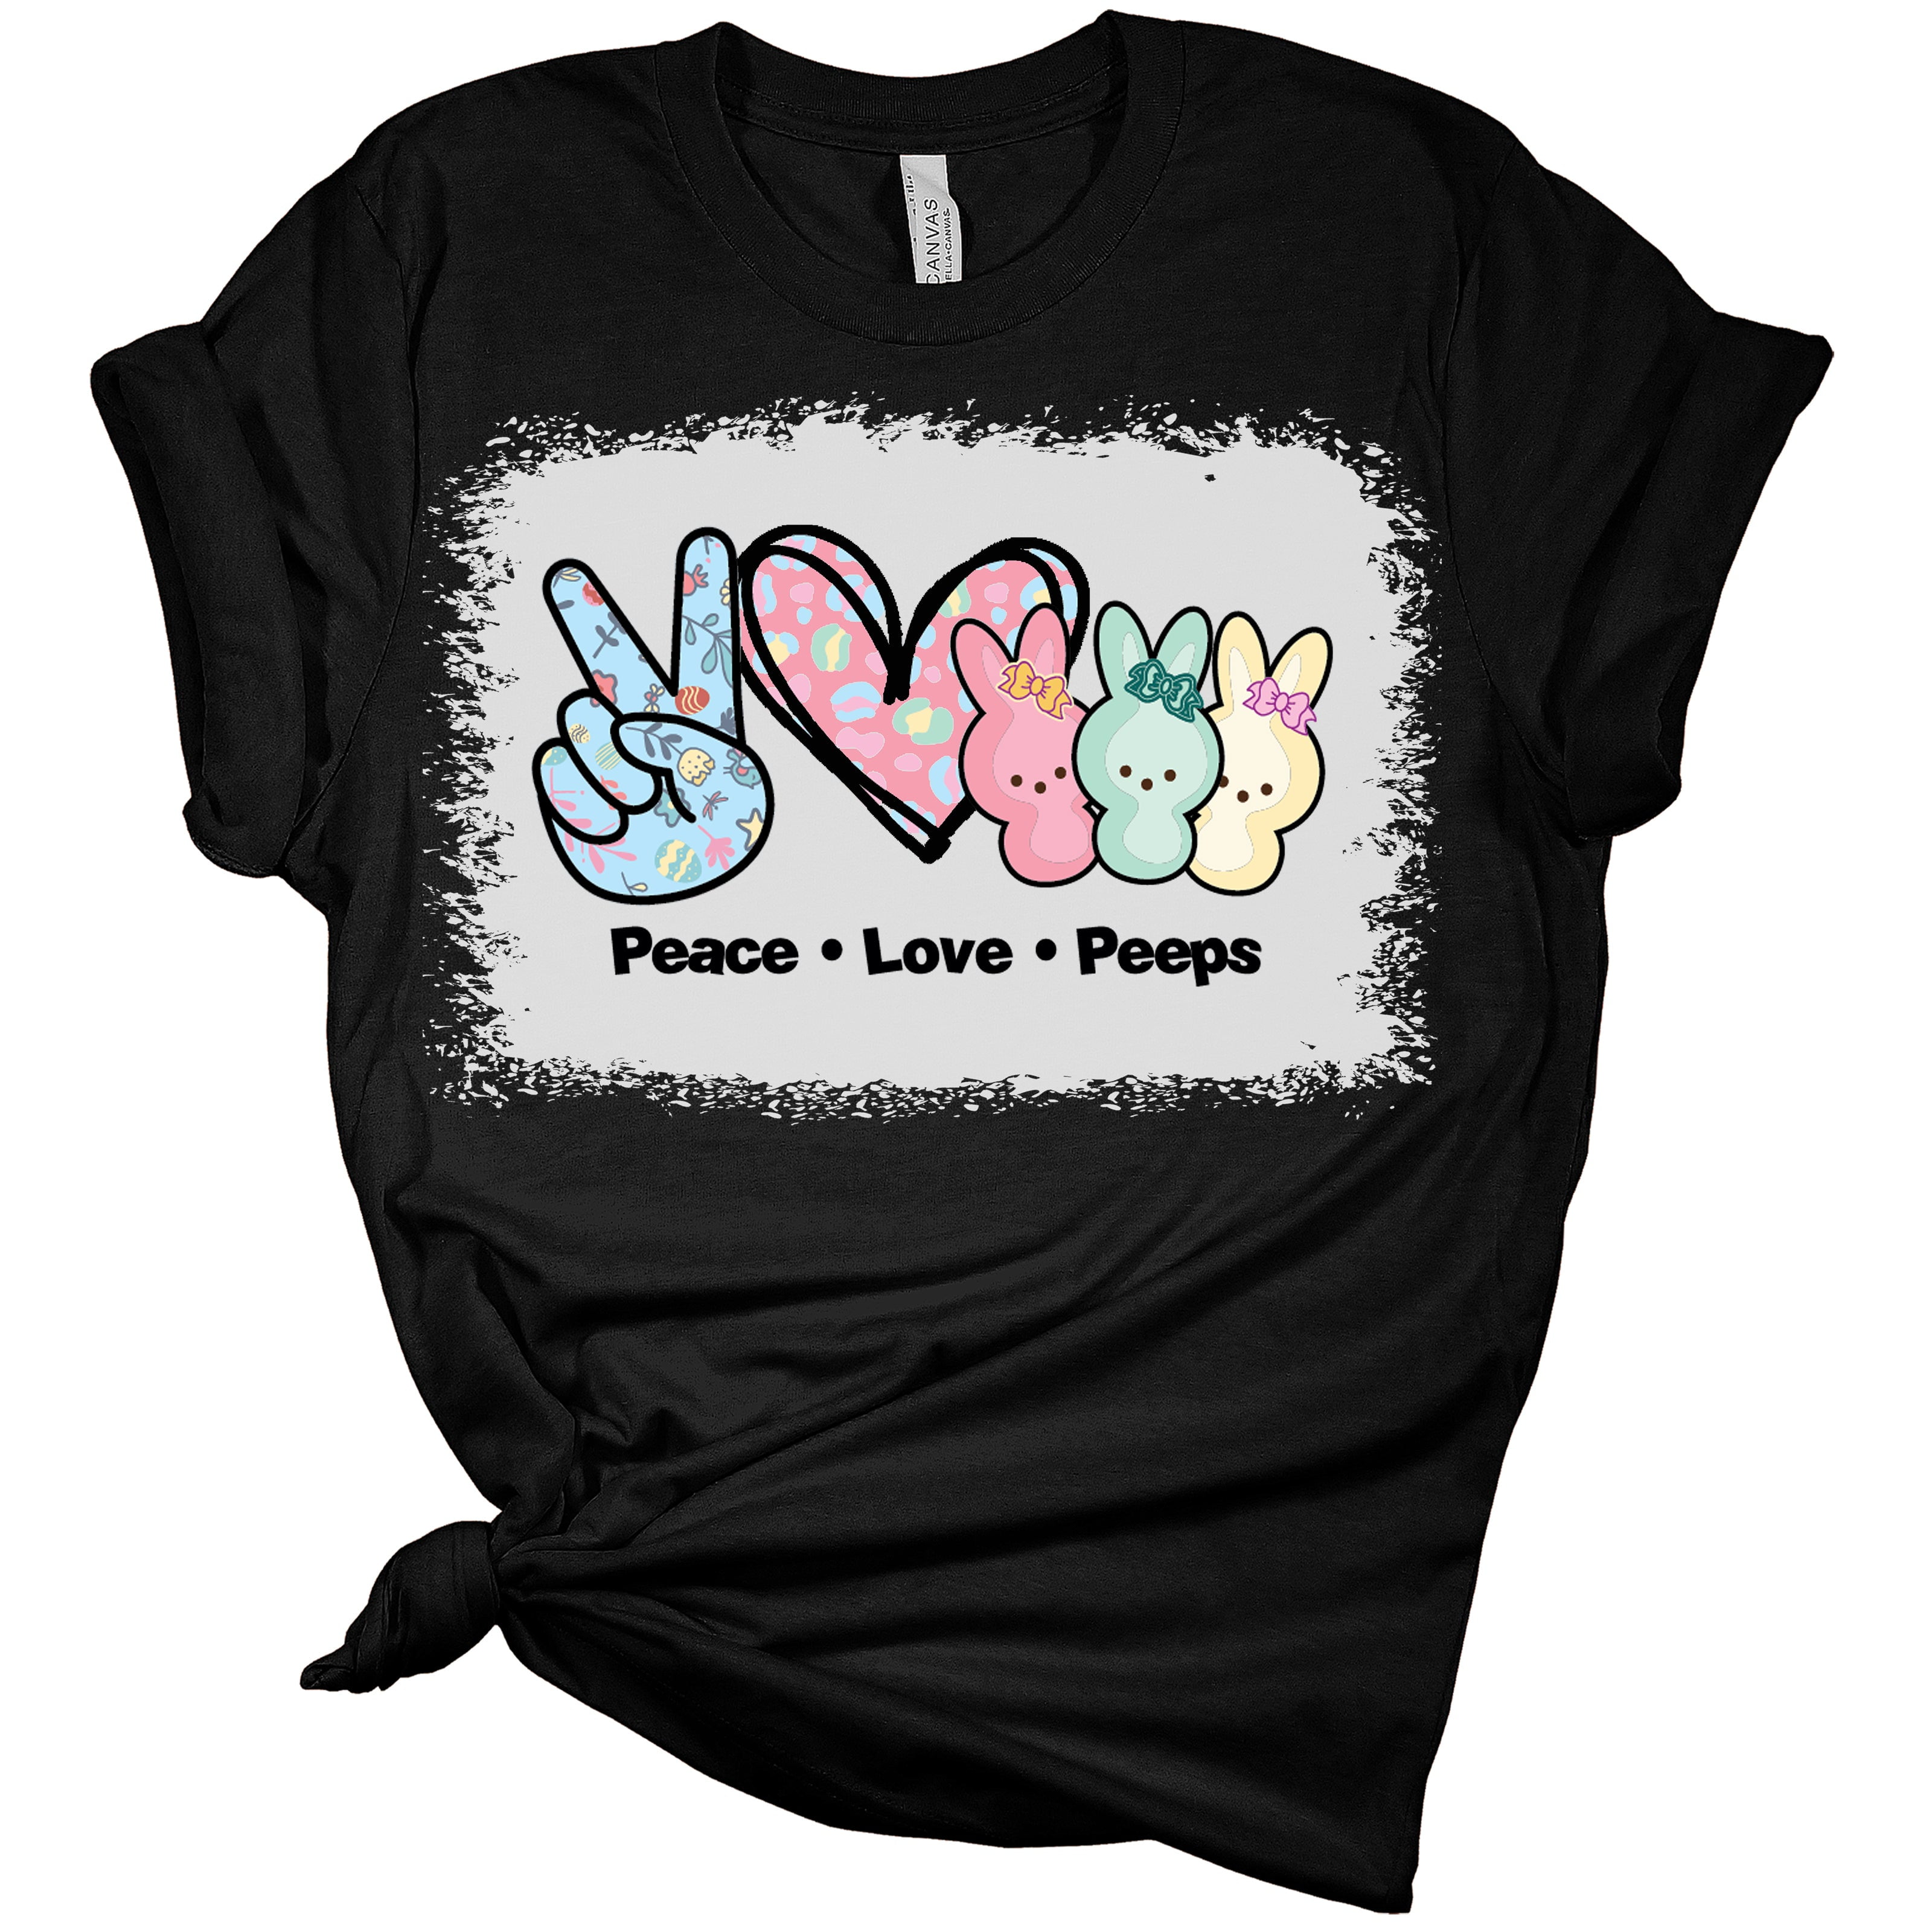 Peace Love Rescue Short-Sleeve Tee ⎮ Animal Rescue Collection – Connected  Clothing Company